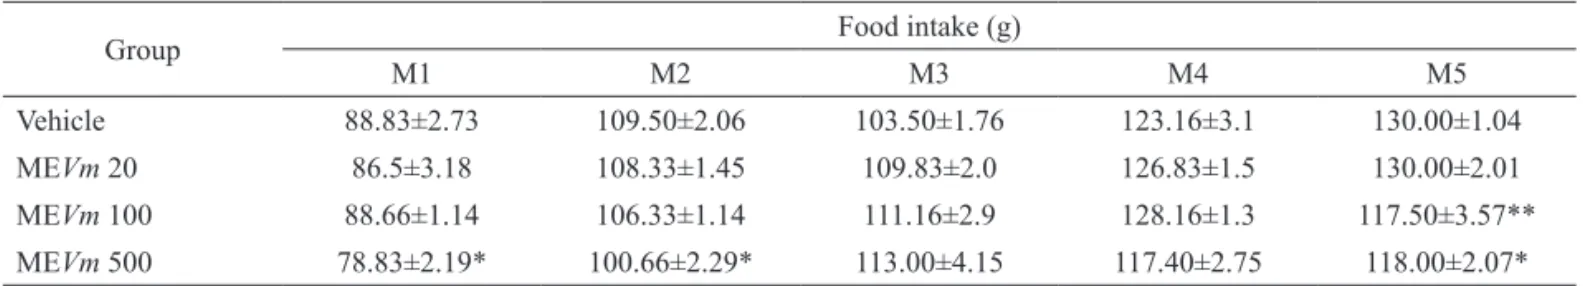 Table 2. Effect of the methanolic extract of  Vatairea macrocarpa (MEVm, mg/kg p.o.) on the food intake of rats after 30 days of  treatment